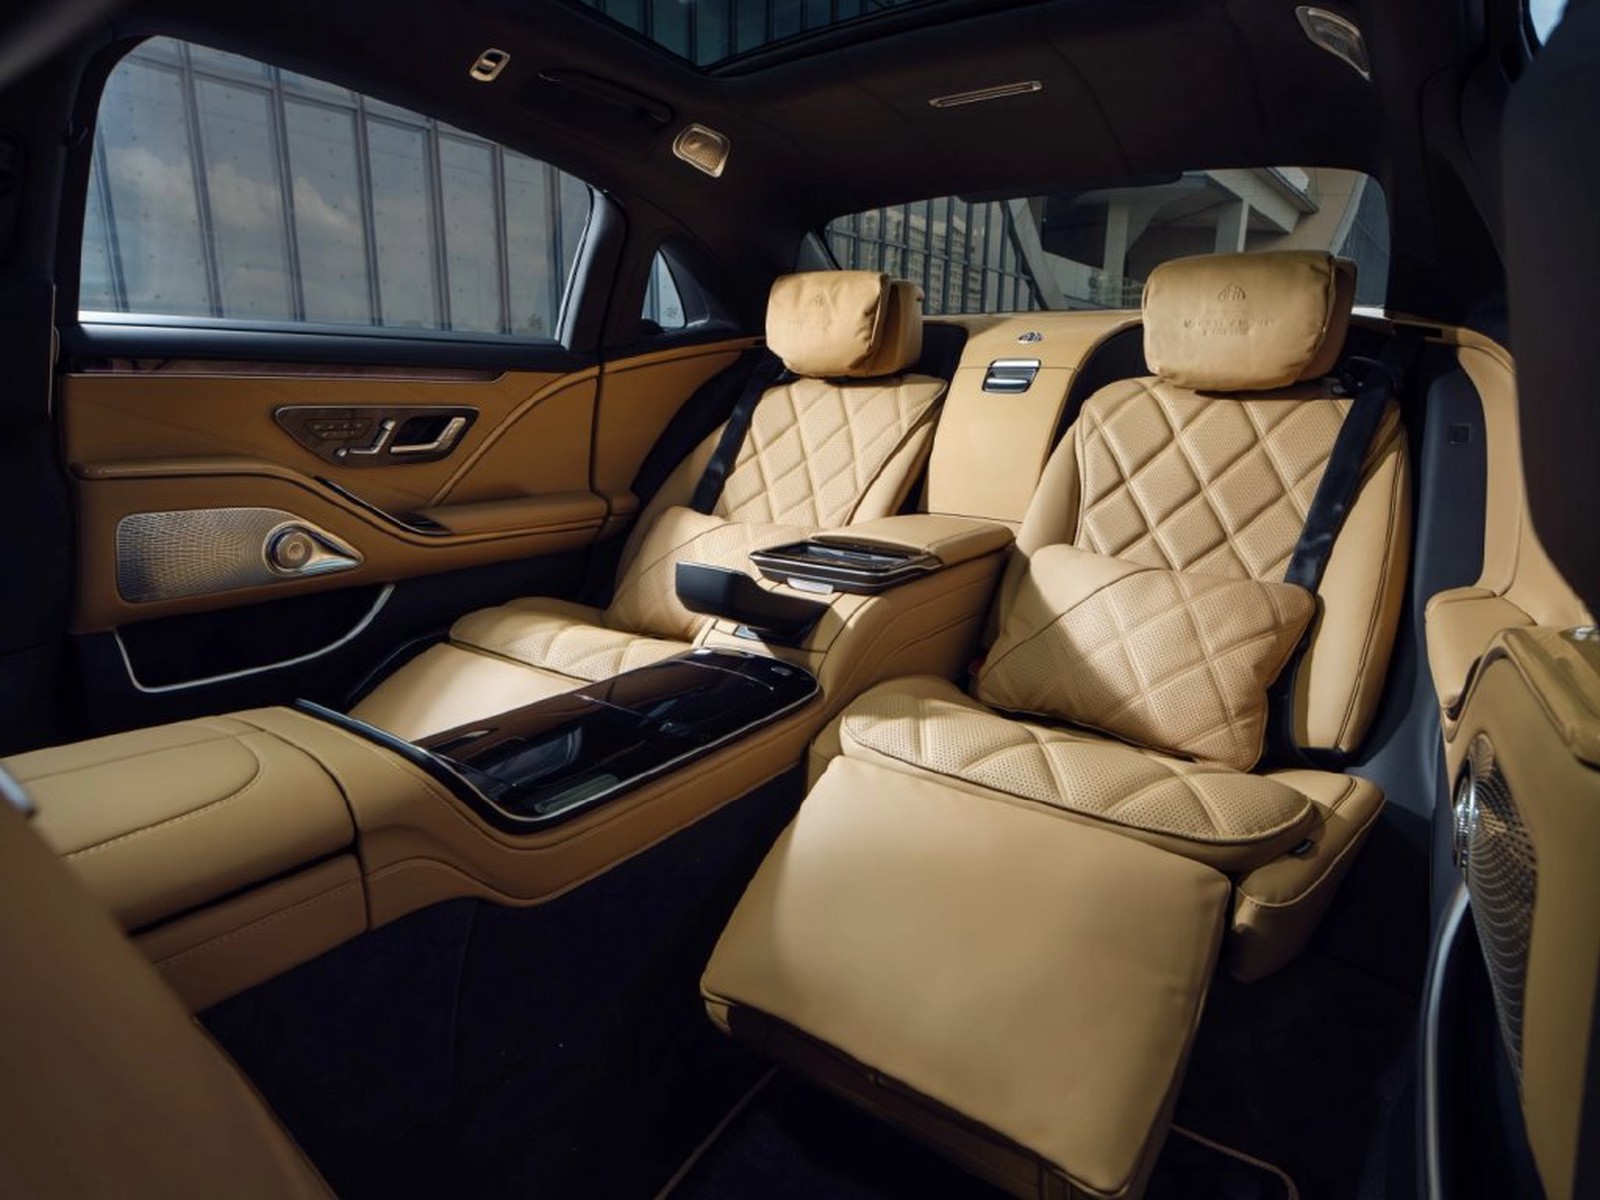 Virgil Abloh's Lasting Legacy: The Exclusive Maybach S680 and